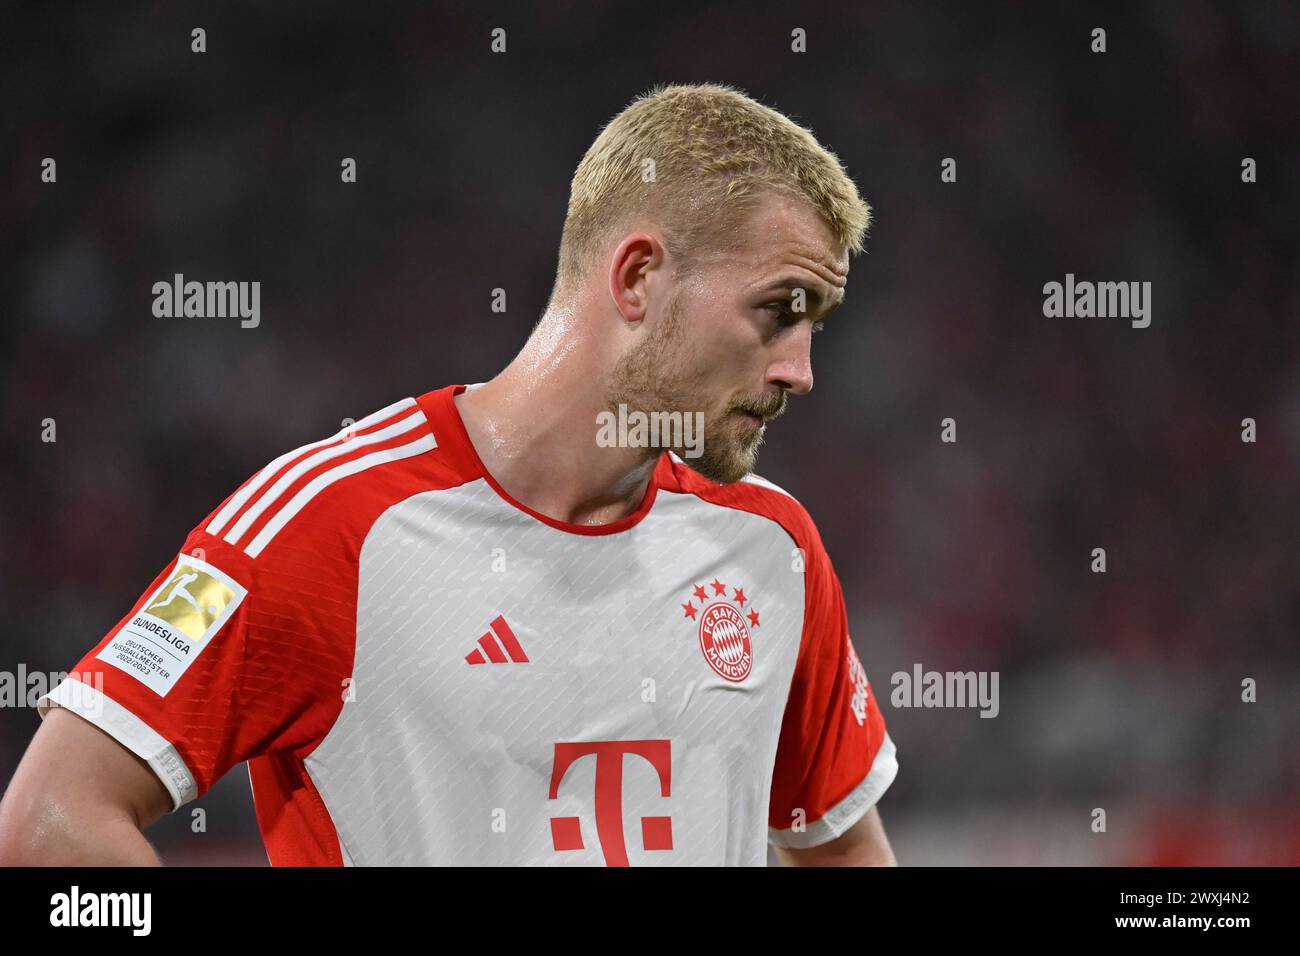 MUNICH, Germany. , . 4 Matthijs de LIGT during the Bundesliga Football match between Fc Bayern Muenchen and Borussia Dortmund, BvB, at the Allianz Arena in Munich on 30. March 2024, Germany. DFL, Fussball, 0:2(Photo and copyright @ Jerry ANDRE/ATP images) (ANDRE Jerry/ATP/SPP) Credit: SPP Sport Press Photo. /Alamy Live News Stock Photo